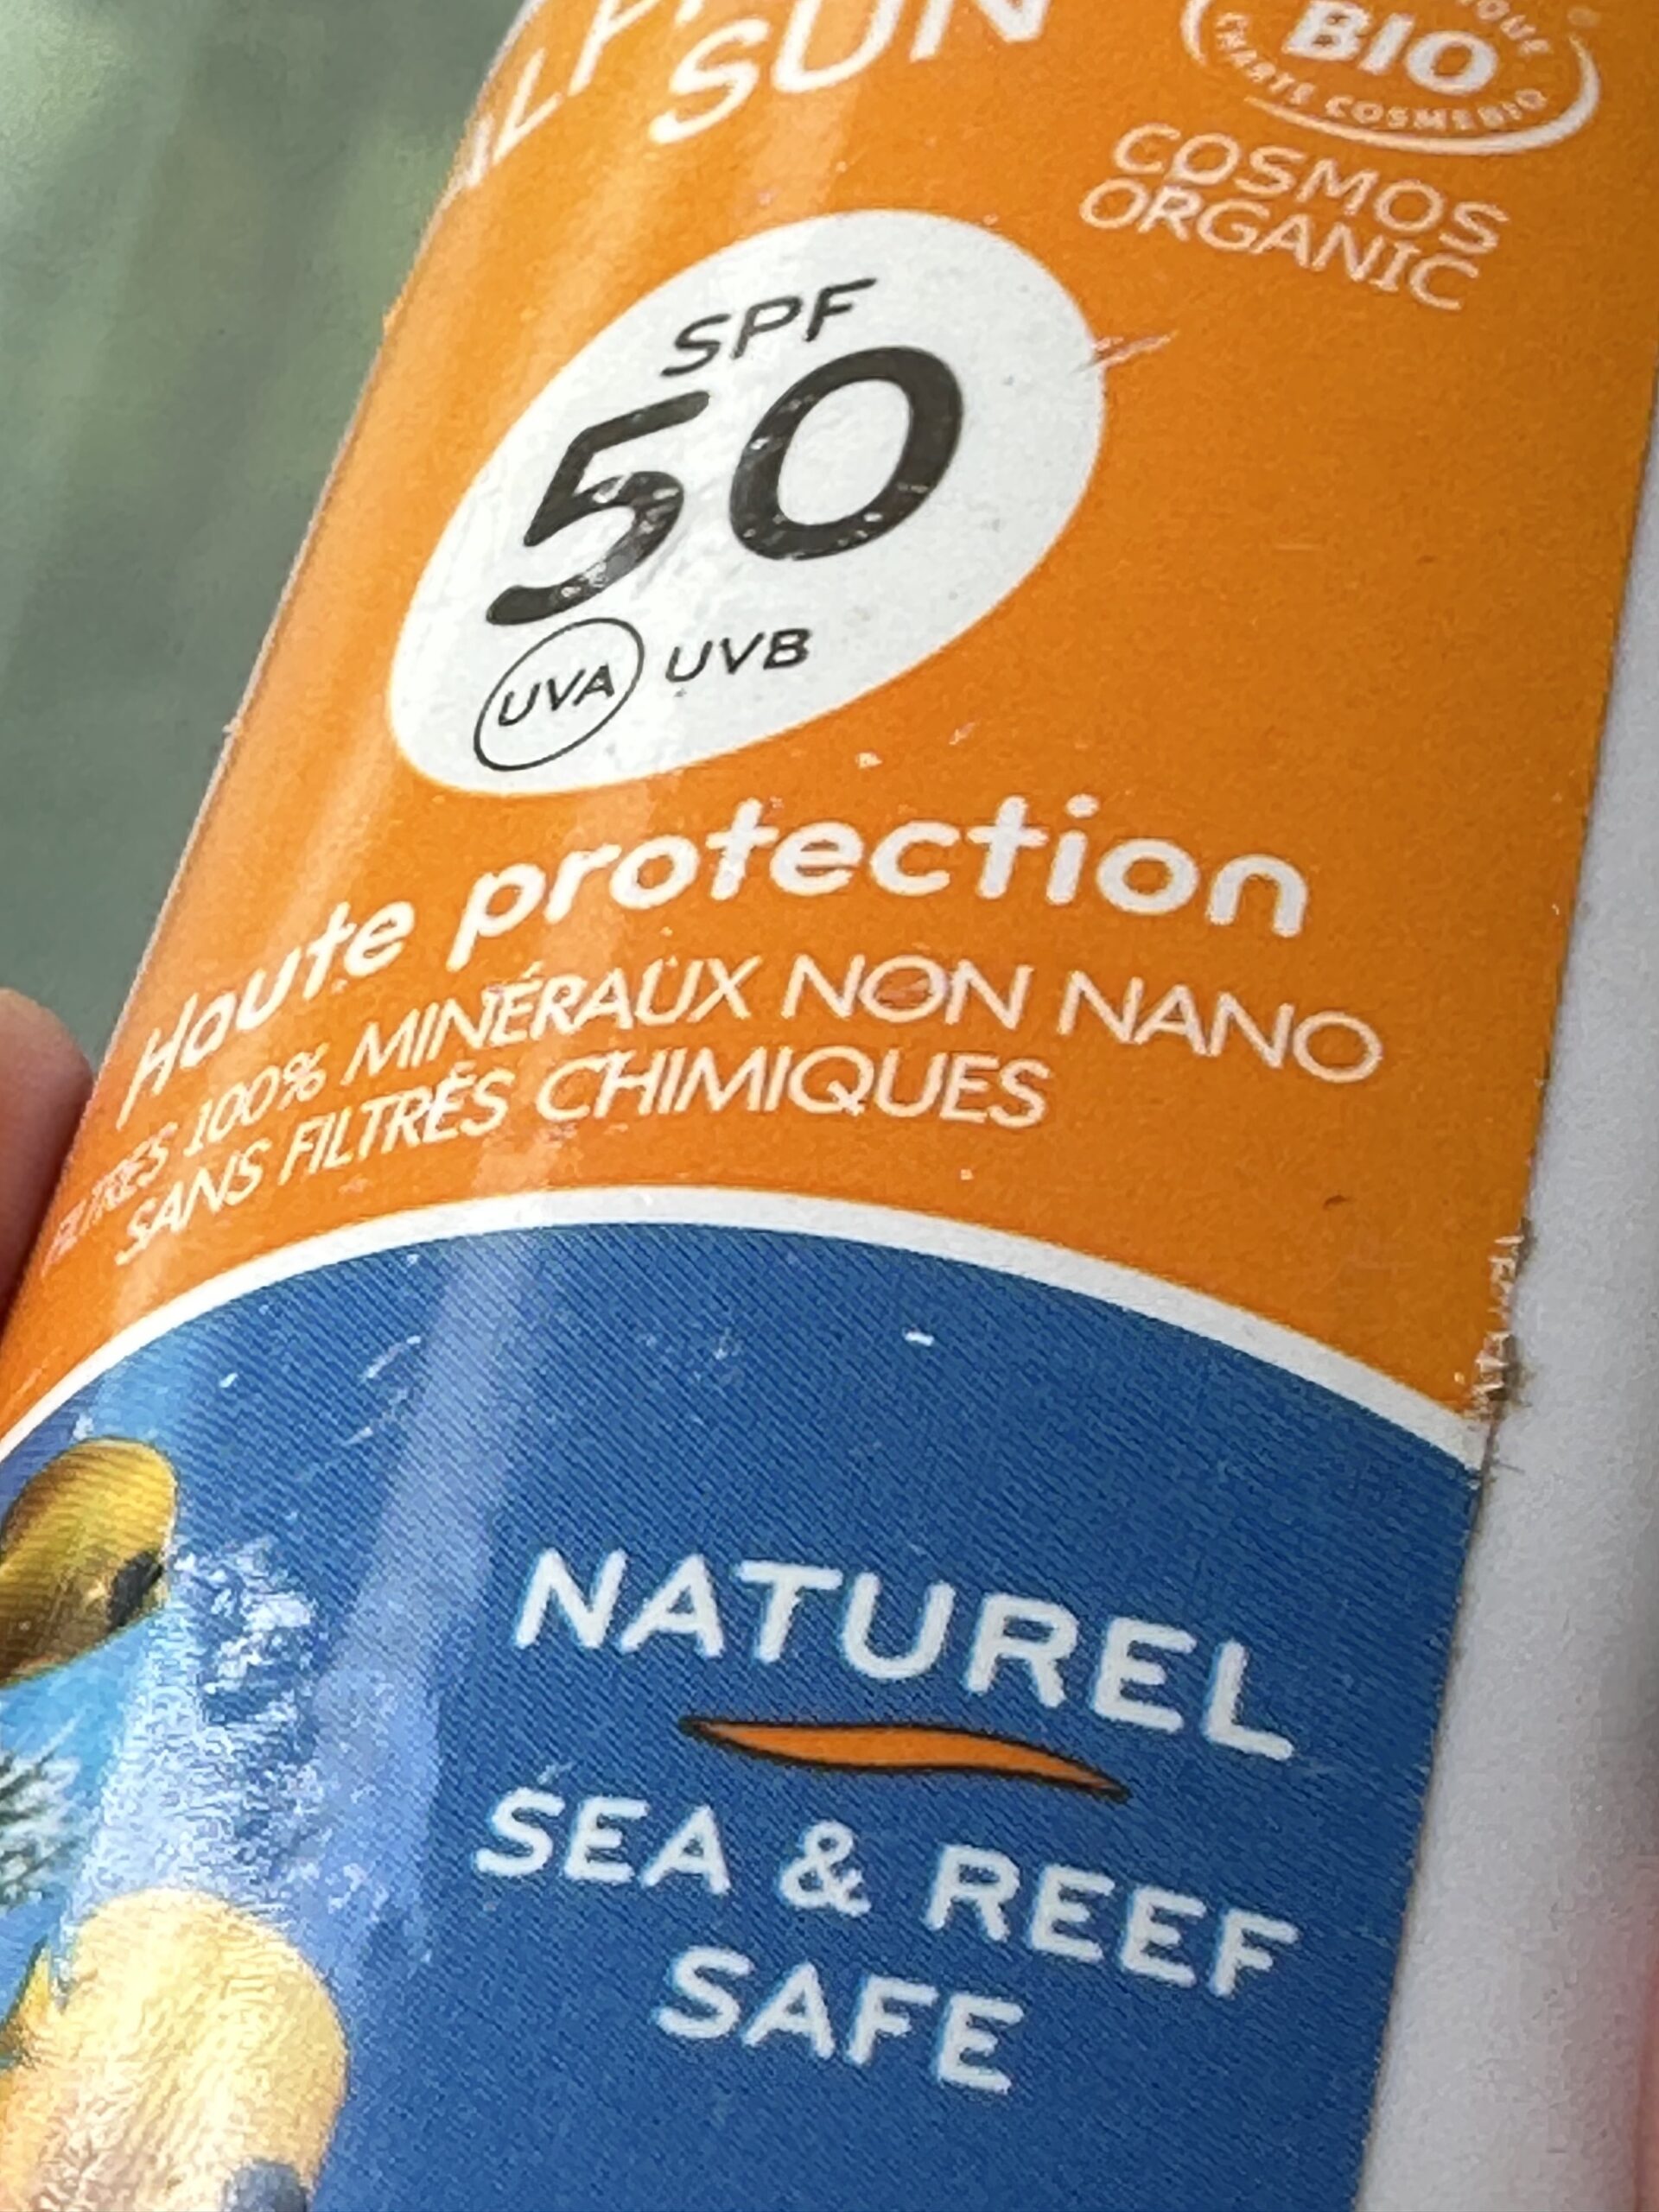 Label of reef friendly sunscreen